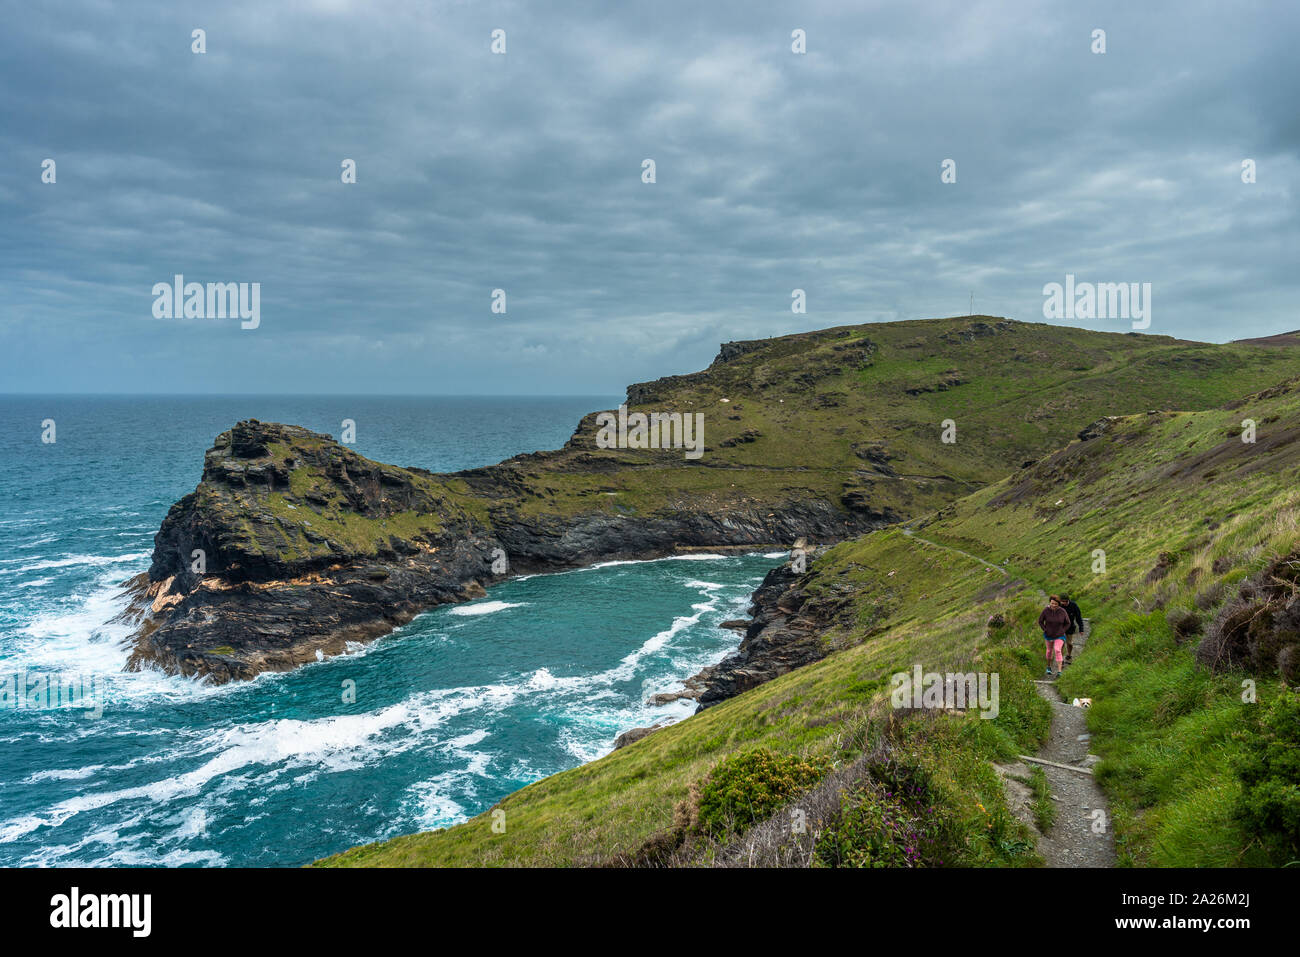 South West Coast Path with views of Warren point at the entrance of Boscastle Harbour in North Cornwall, England, UK. Stock Photo